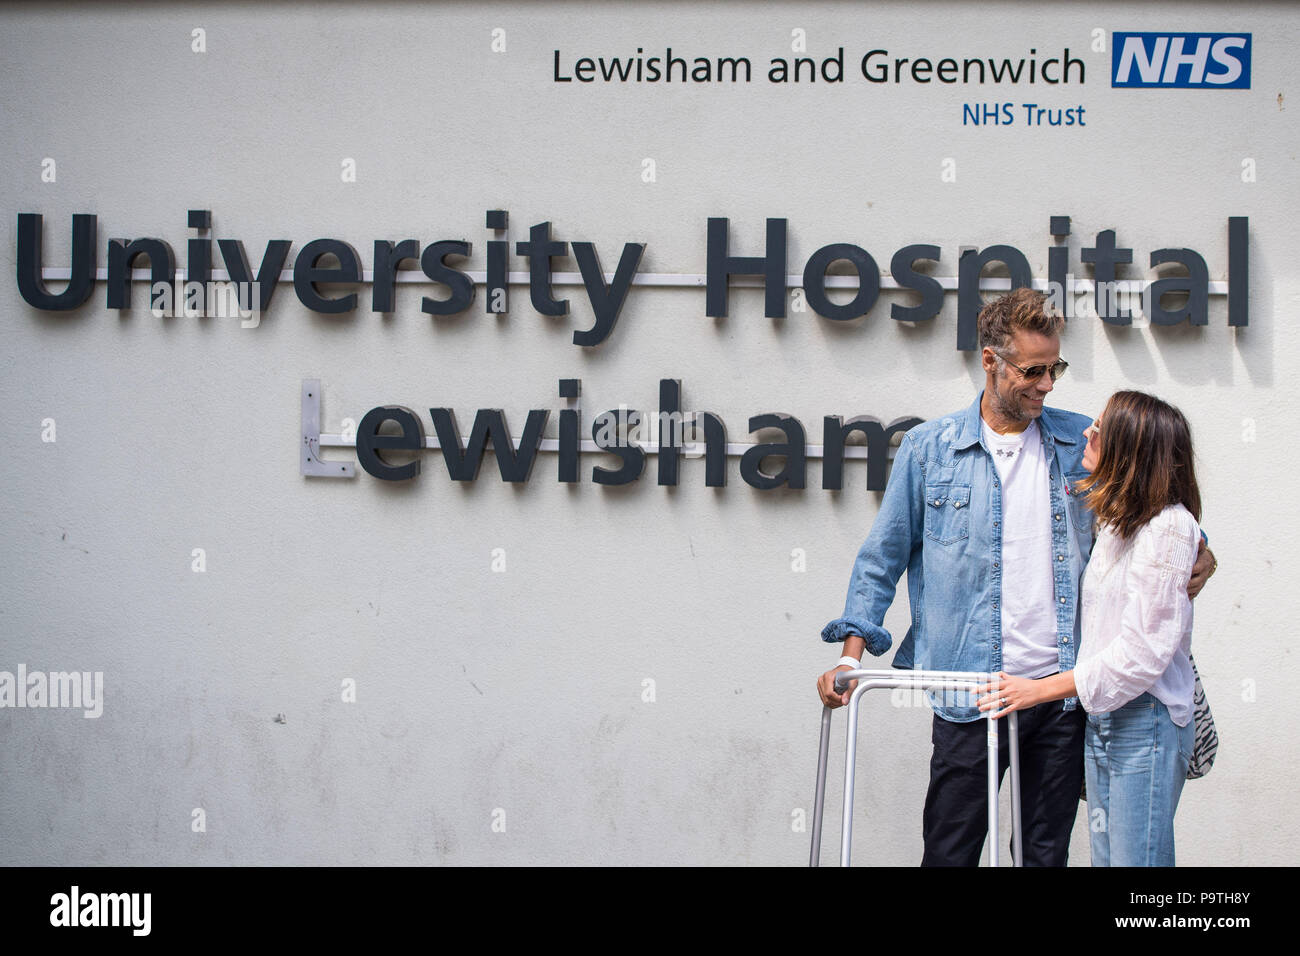 Former BBC TV Blue Peter presenter Richard Bacon leaves Lewisham Hospital in south east London with his wife Rebecca. Stock Photo